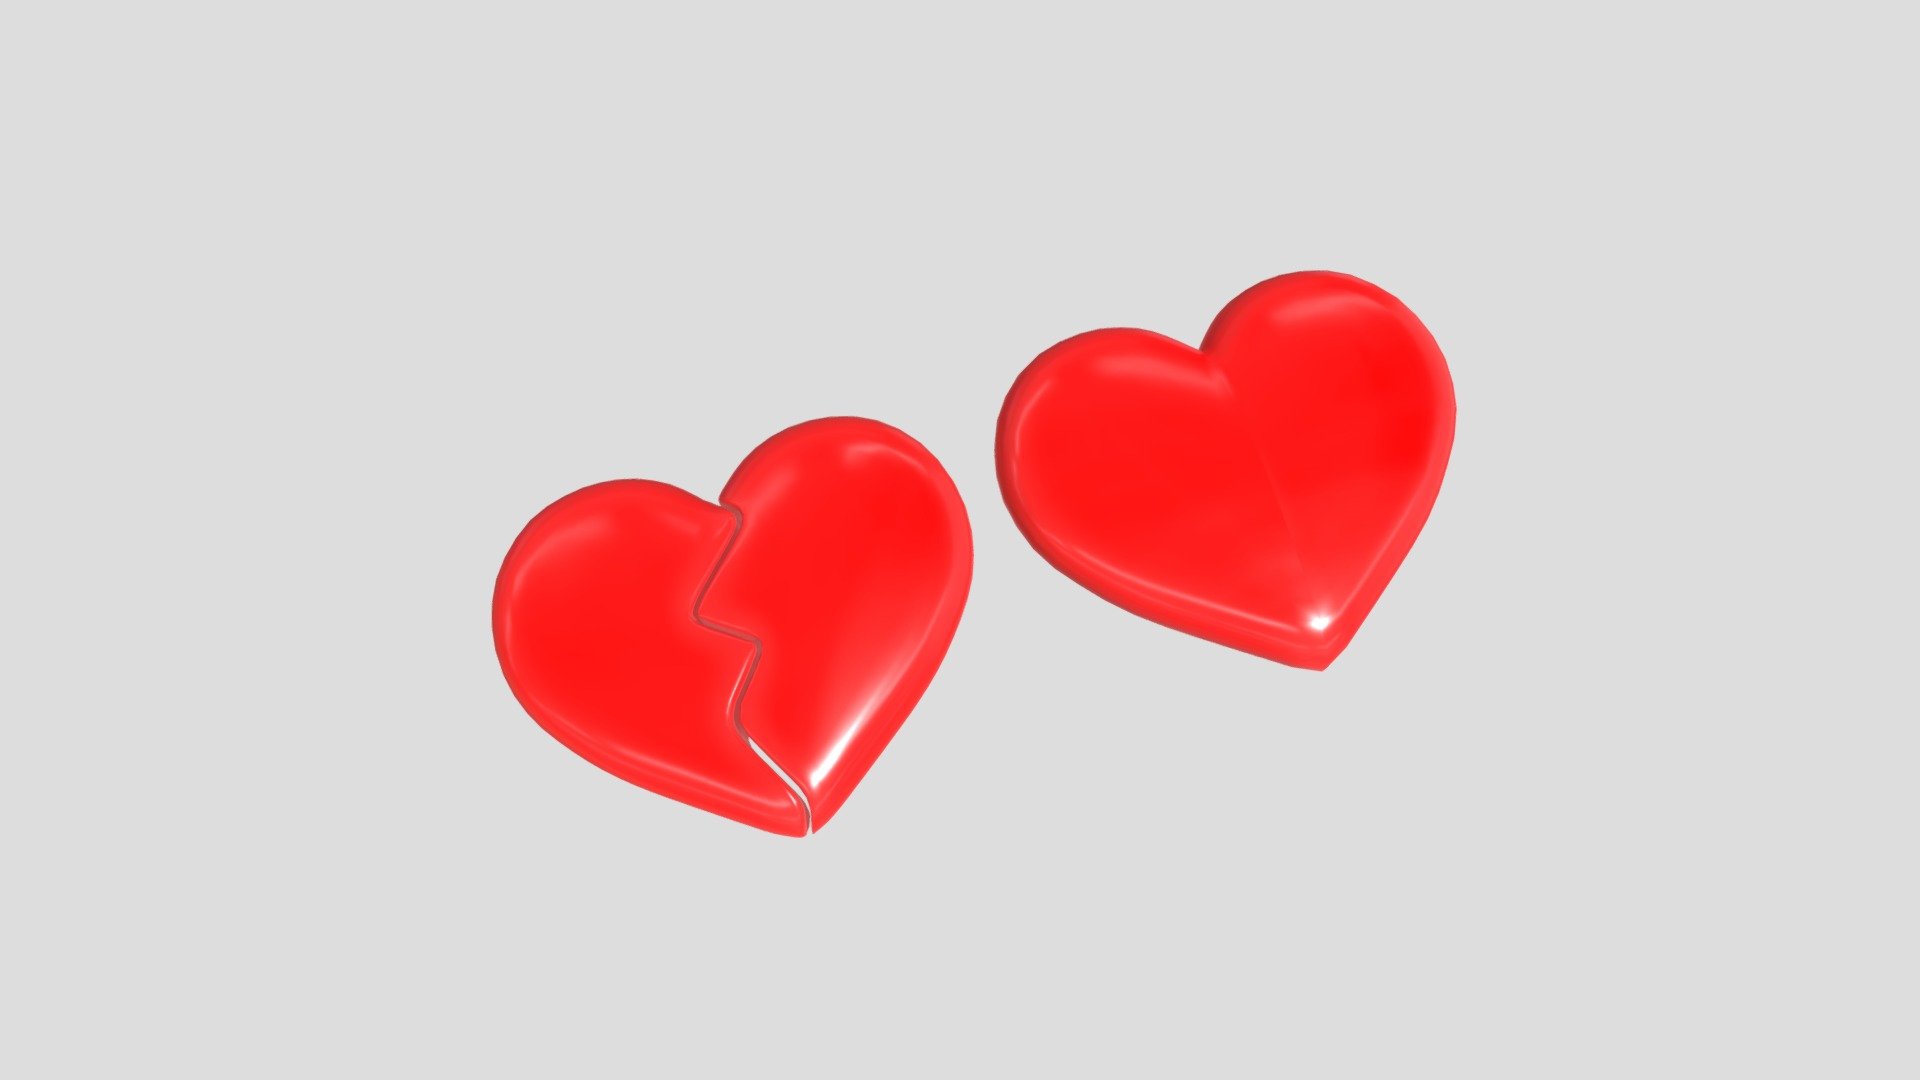 These cartoon style hearts are a great addition to any render and have all quad geometry. Easily add or remove detail with subdivisions. The mesh is viewable from all angles and distances.

This Includes:

The mesh (Full Heart, Broken Heart)
2K Texture Sets (Albedo, Roughness, Normal, Edge Mask)
2 Texture sets on the broken heart (Plain, Red with Black border at seam)
The mesh is UV Unwrapped for easy retexturing - Cartoon Heart - Buy Royalty Free 3D model by Desertsage 3d model